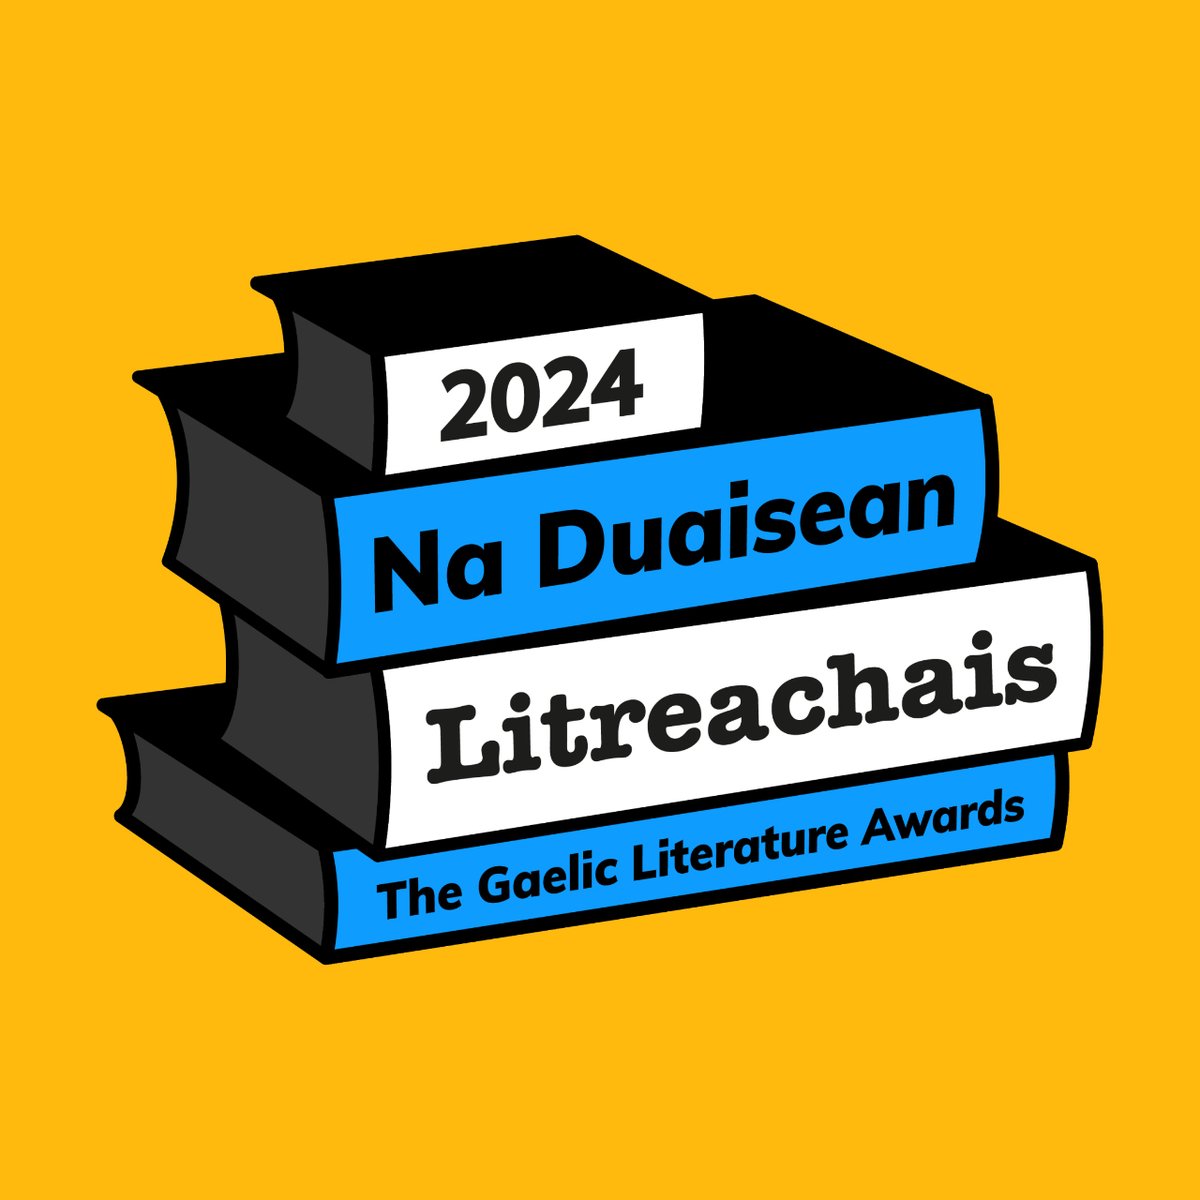 Ceann-là ri thighinn ⏰ The Gaelic Literature Awards 2024 are open until 30 April with @LeughLeabhar. Scottish Gaelic writers and publishers can win prizes of £1,000 and £500 for books in poetry, fiction, non-fiction and children and young people. gaelicbooks.org/the-gaelic-lit…